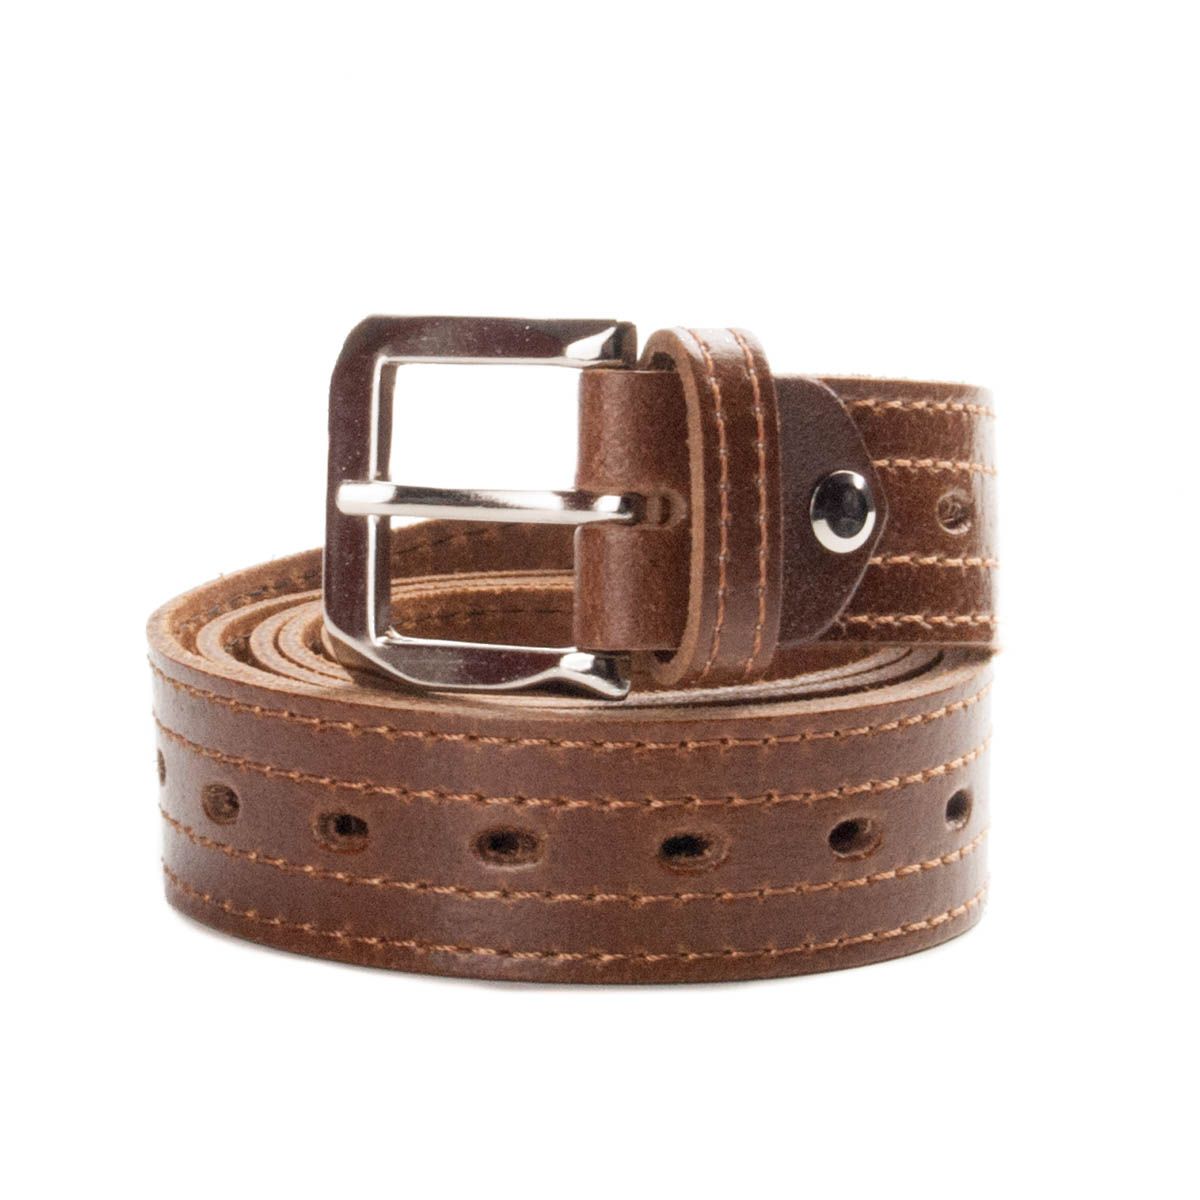 The Stella with its width of 3 cm is perfect to combine it with multiple options throughout the year. Simple and elegant available in 9 different colors. It is manufactured in natural leather and in Spain. The measures provided are in centimeters from the beginning of the skin to the end, therefore without counting the buckle. The adjustment is easily customizable closure by which you can cut it to the desired measure if you get great.